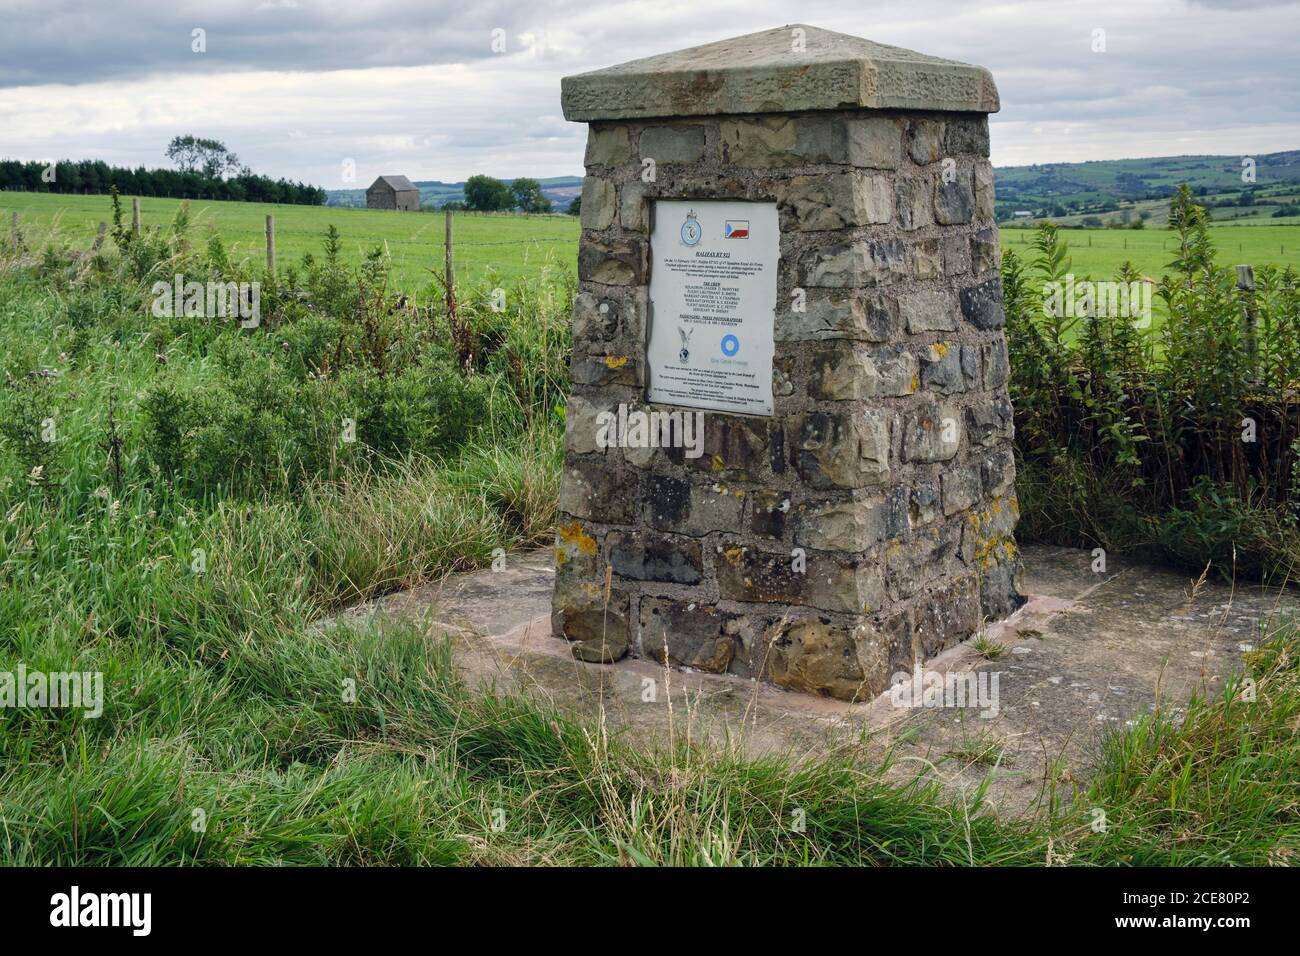 Memorial to crew of aircraft which crashed at this site while carrying out an airdrop to snowbound communities in 1947, near Onecote, Staffordshire Stock Photo